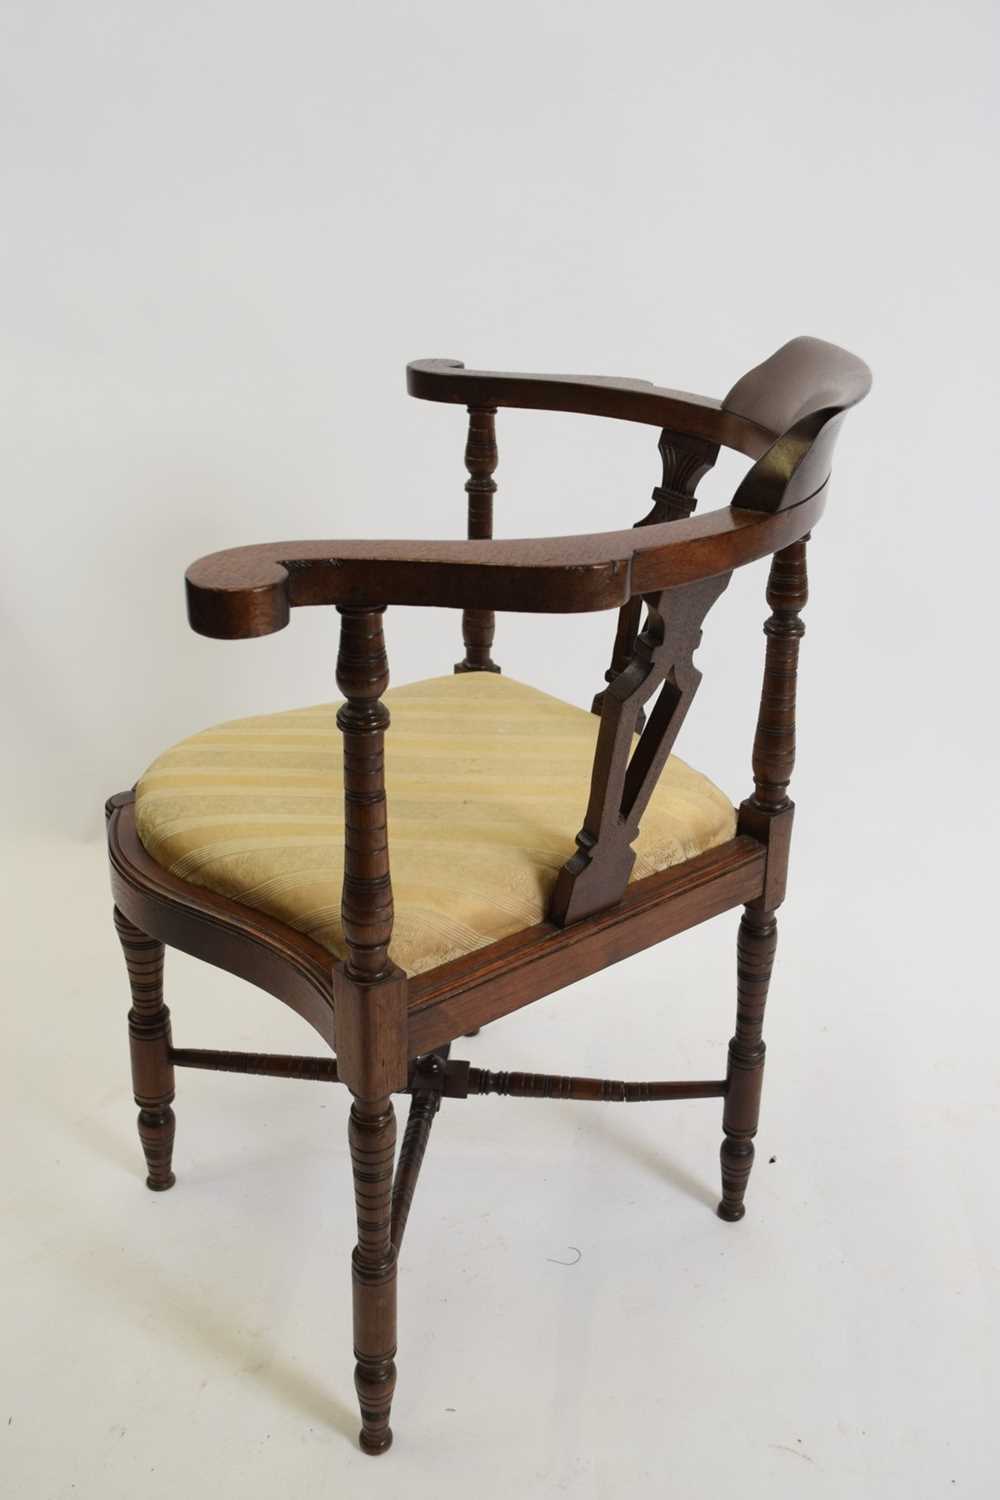 Edwardian mahogany framed corner chair with striped upholstered seats, 68cm wide - Image 2 of 3